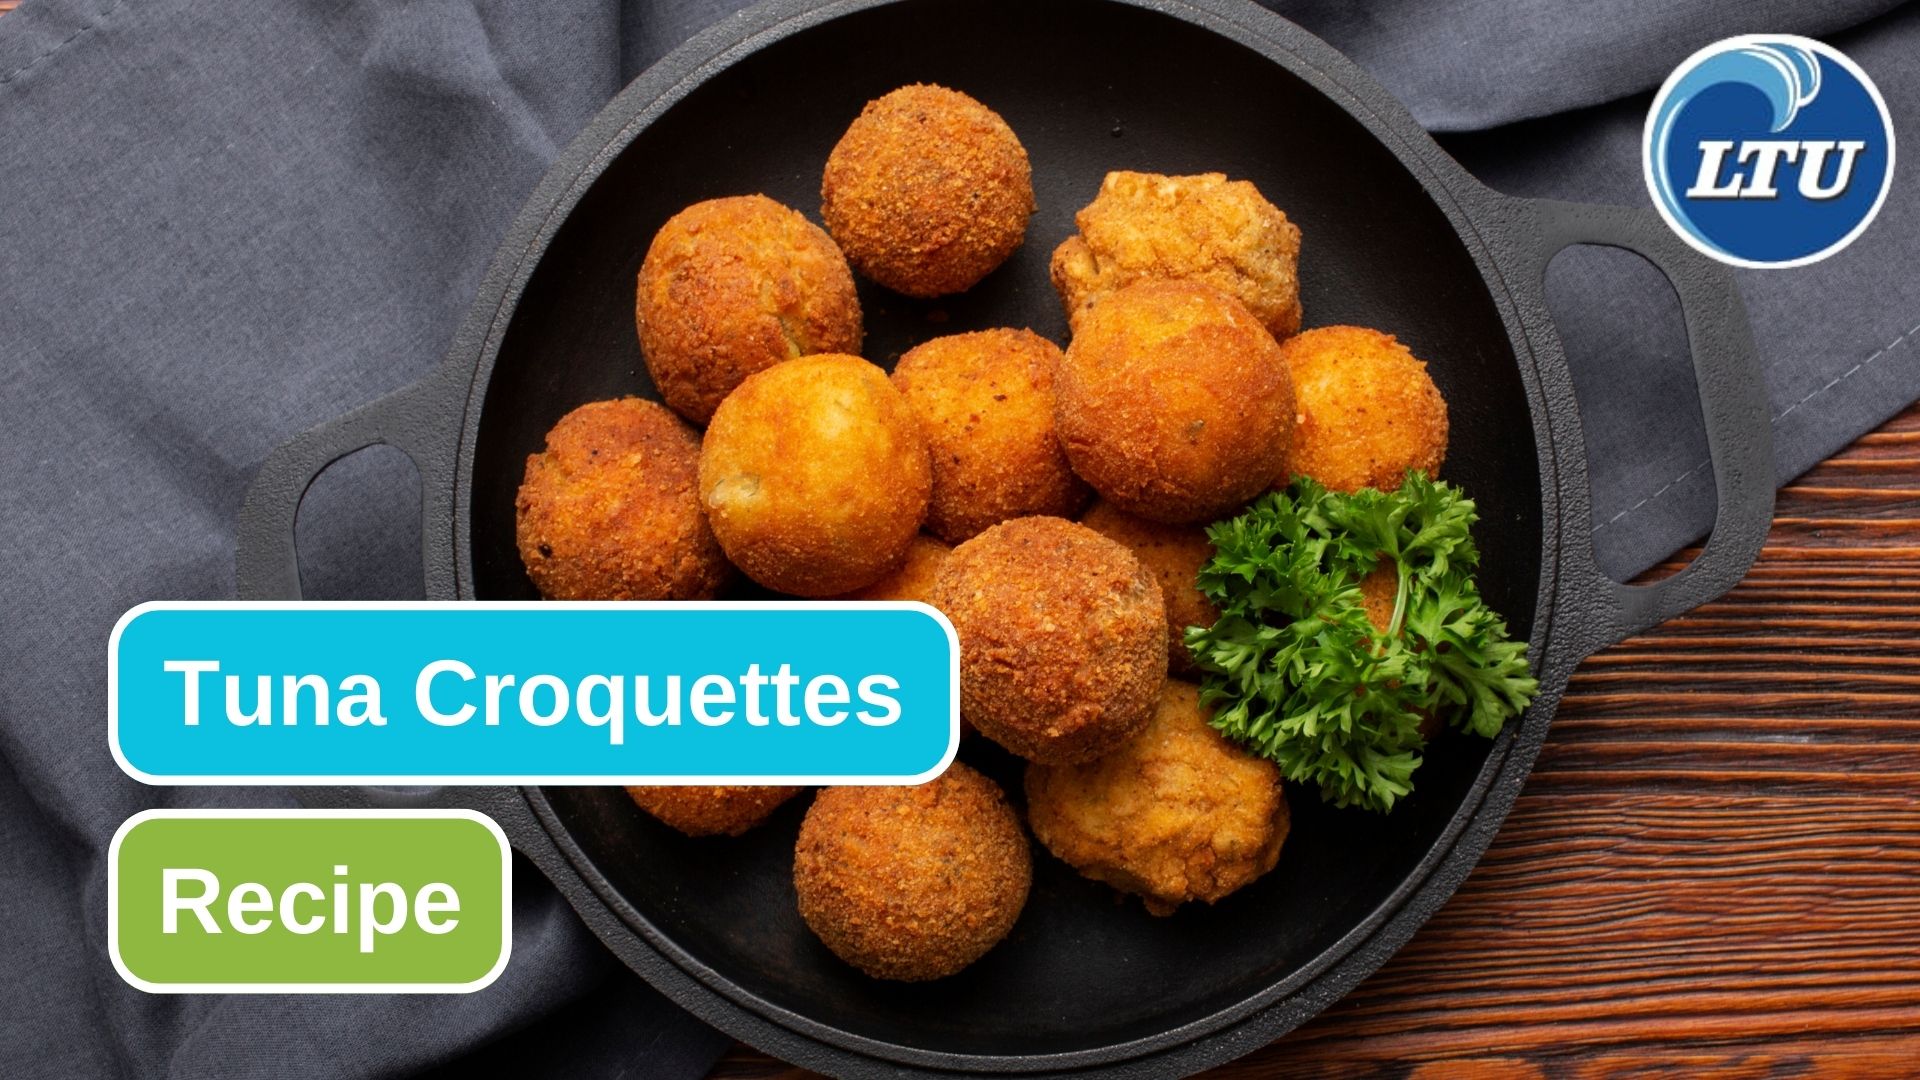 Here’s How To Make Perfect Tuna Croquettes